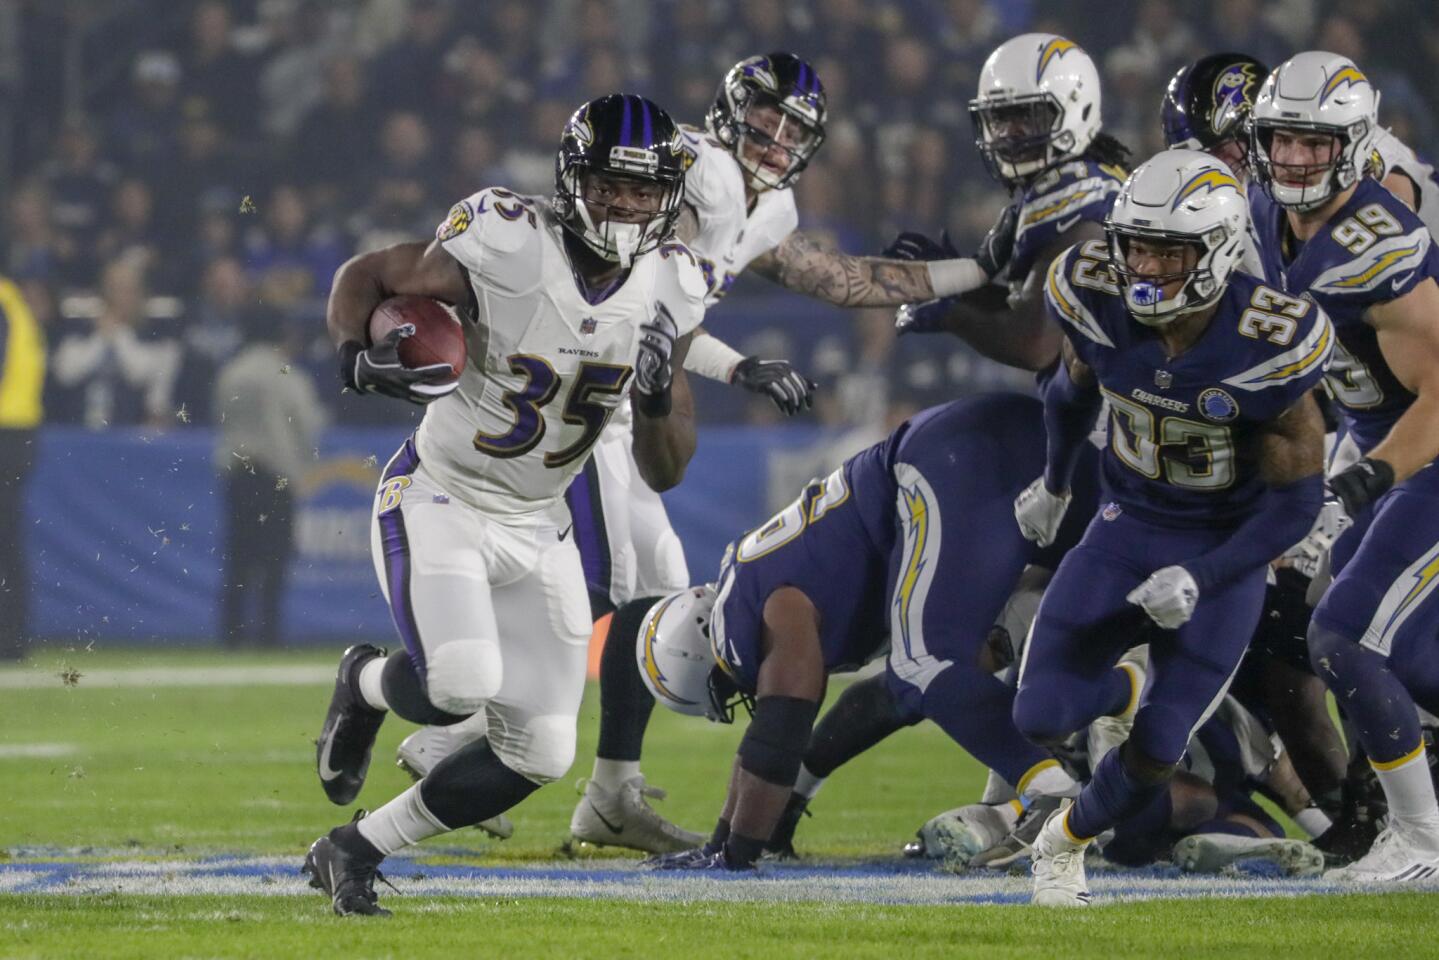 Ravens running back Gus Edwards sprints past Chargers defenders for a 43-yard run on the first play from scrimmage at StubHub Center.